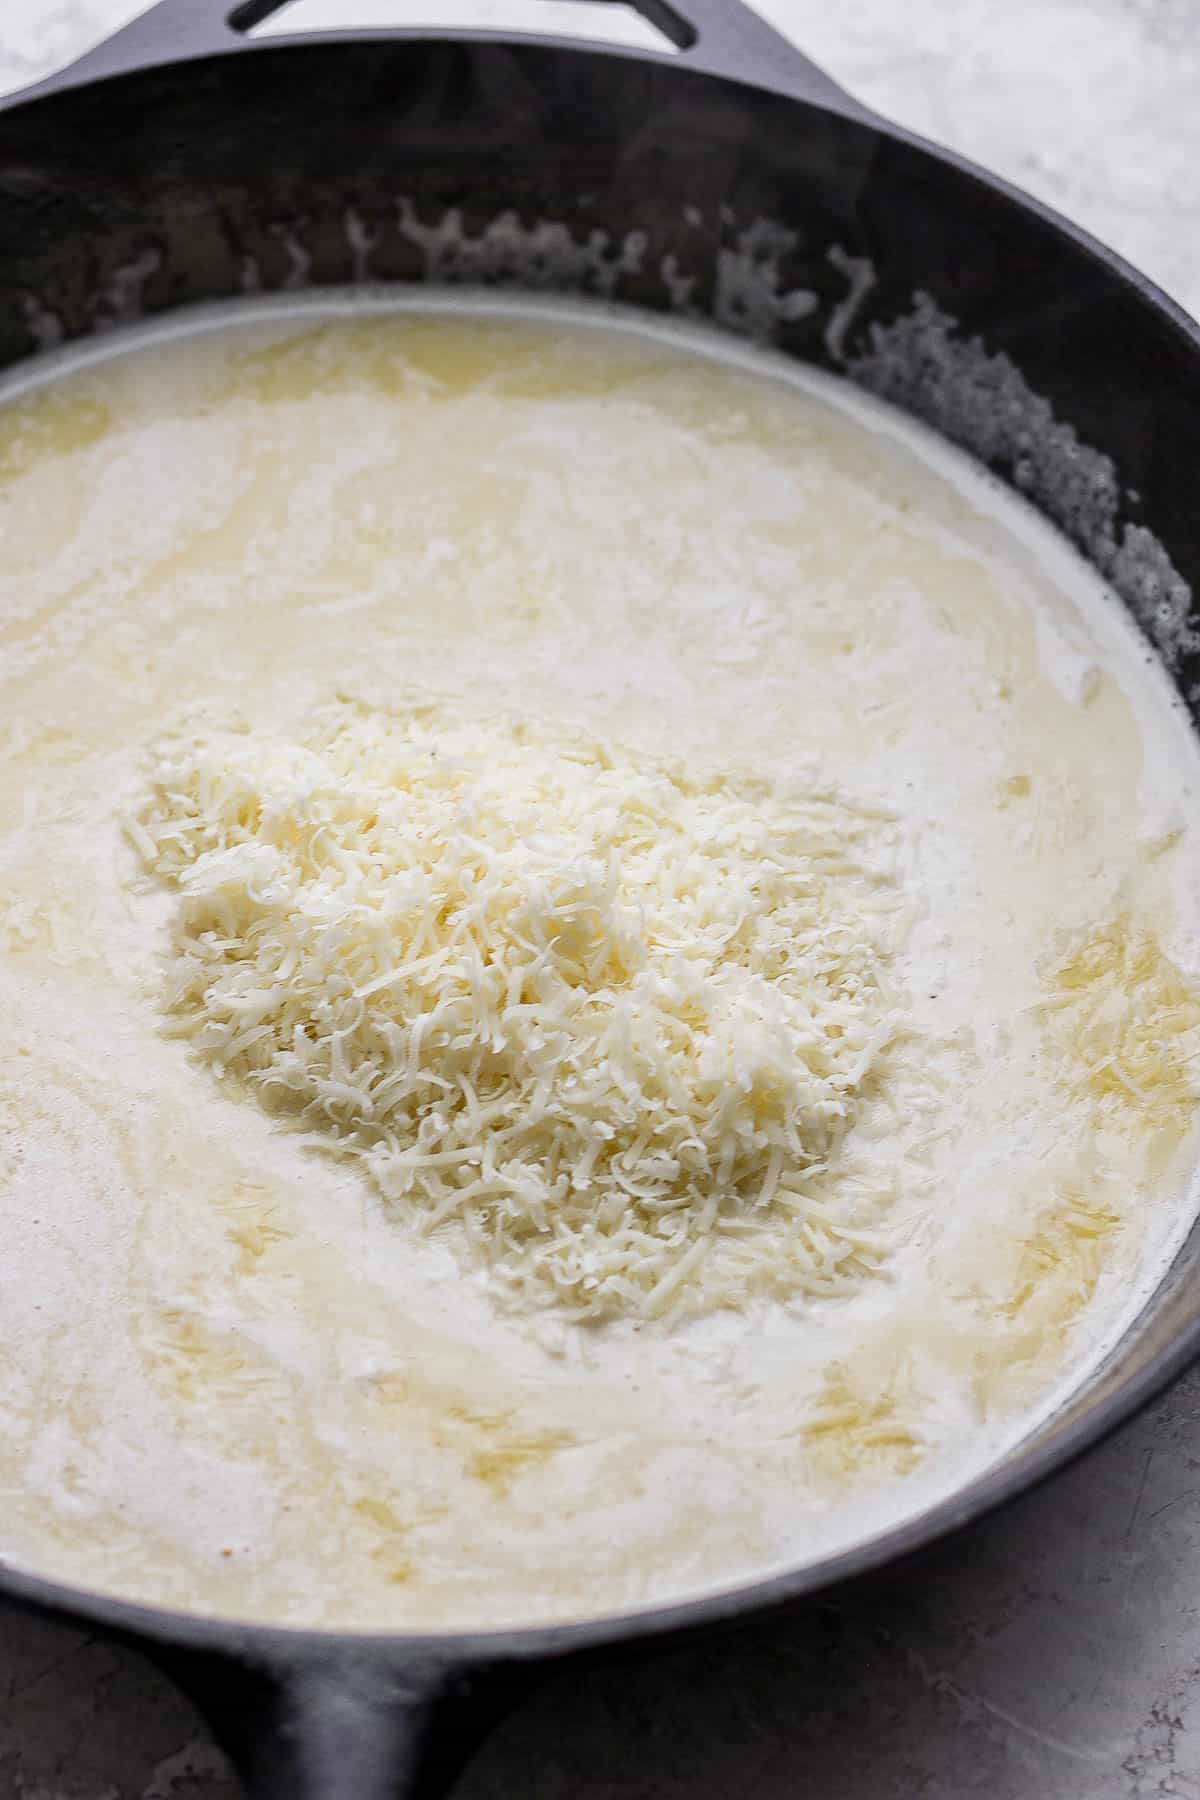 Freshly grated parmesan cheese added to the pan.